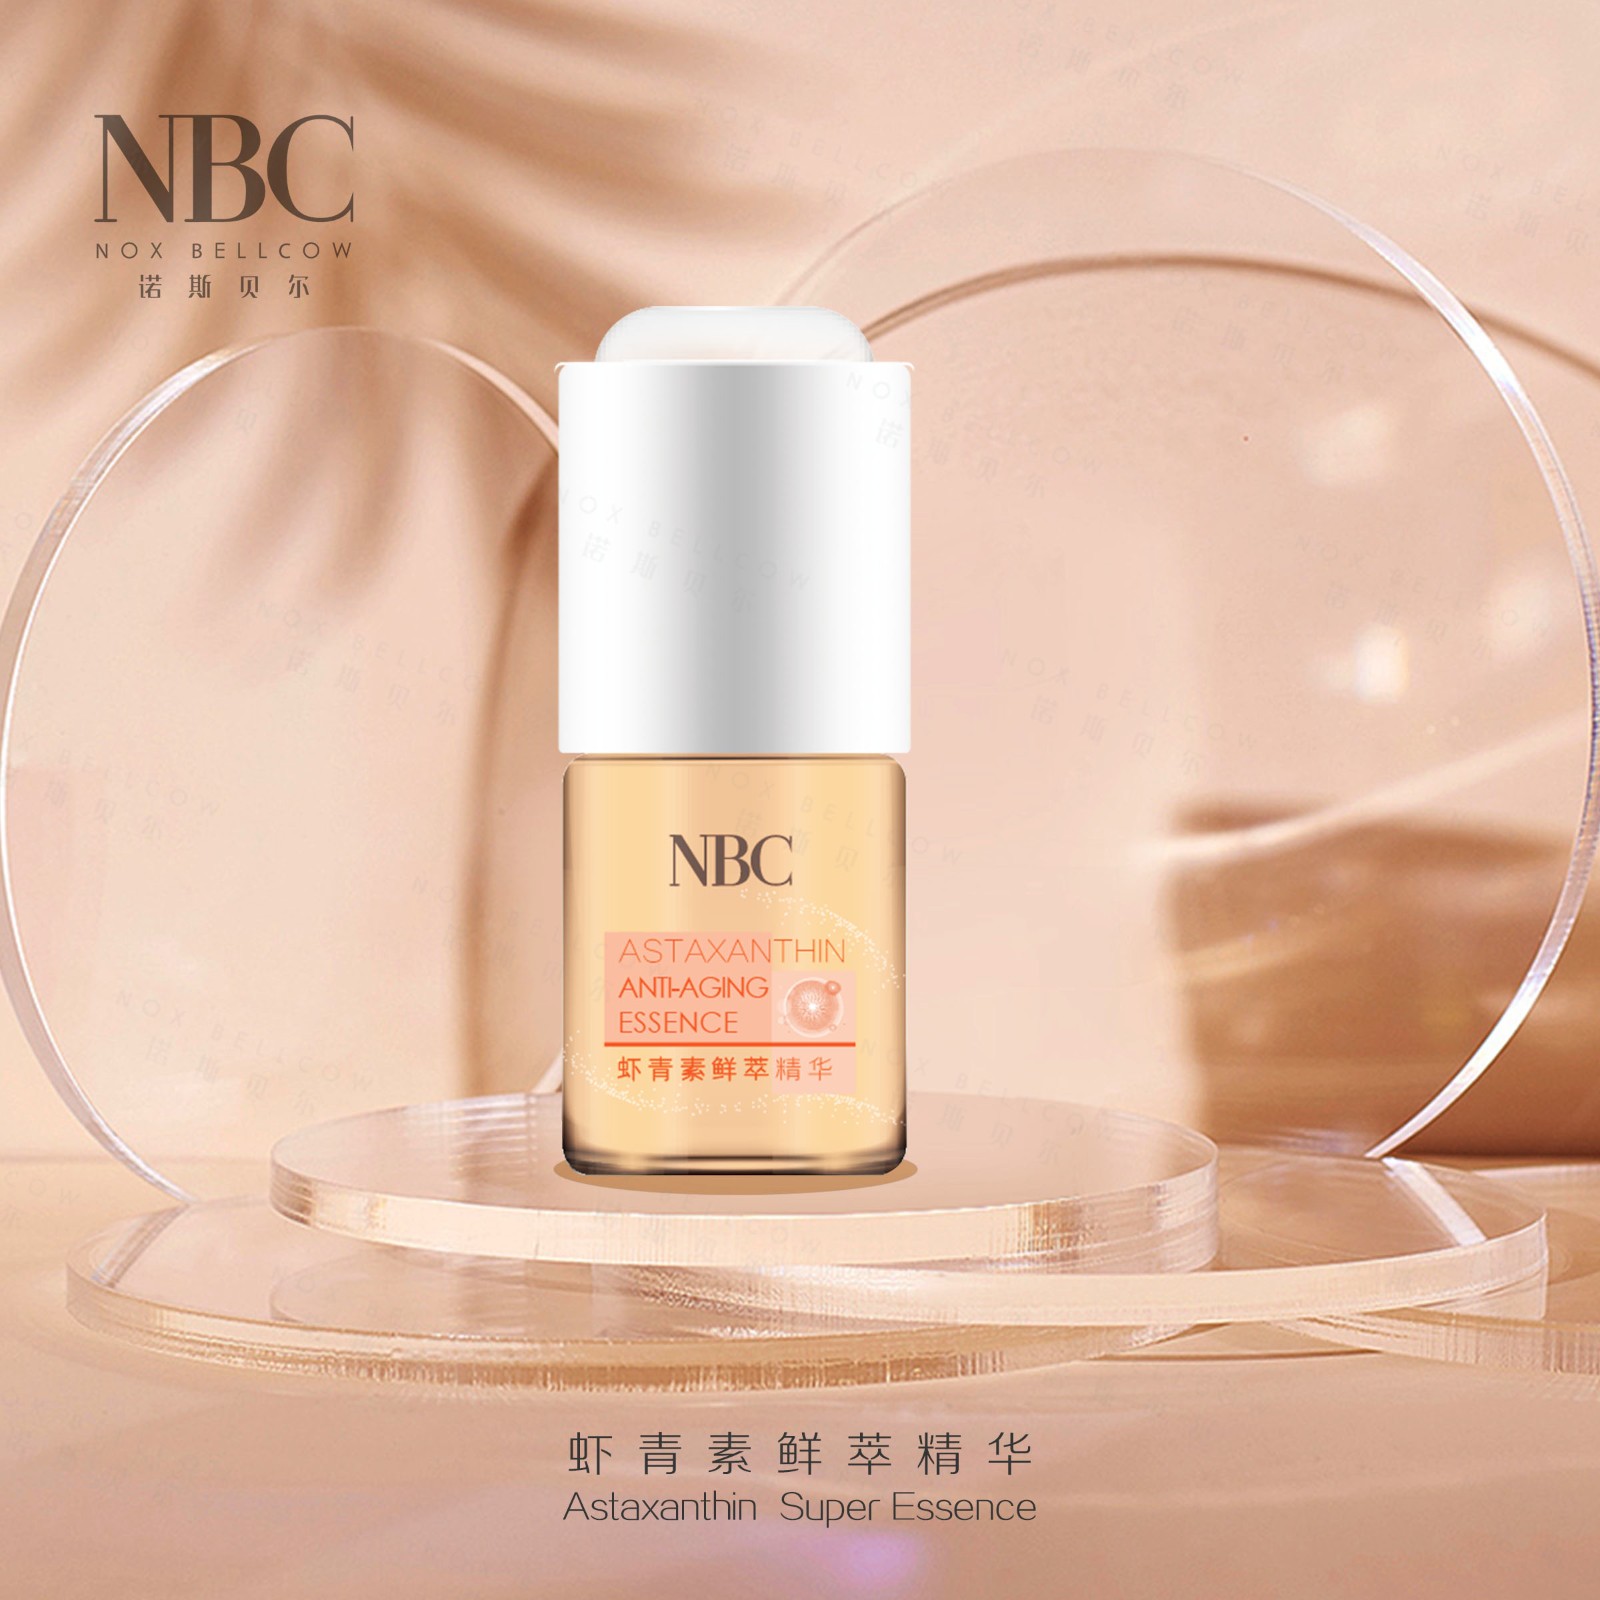 NOX BELLCOW essence make up for business for skincare-4